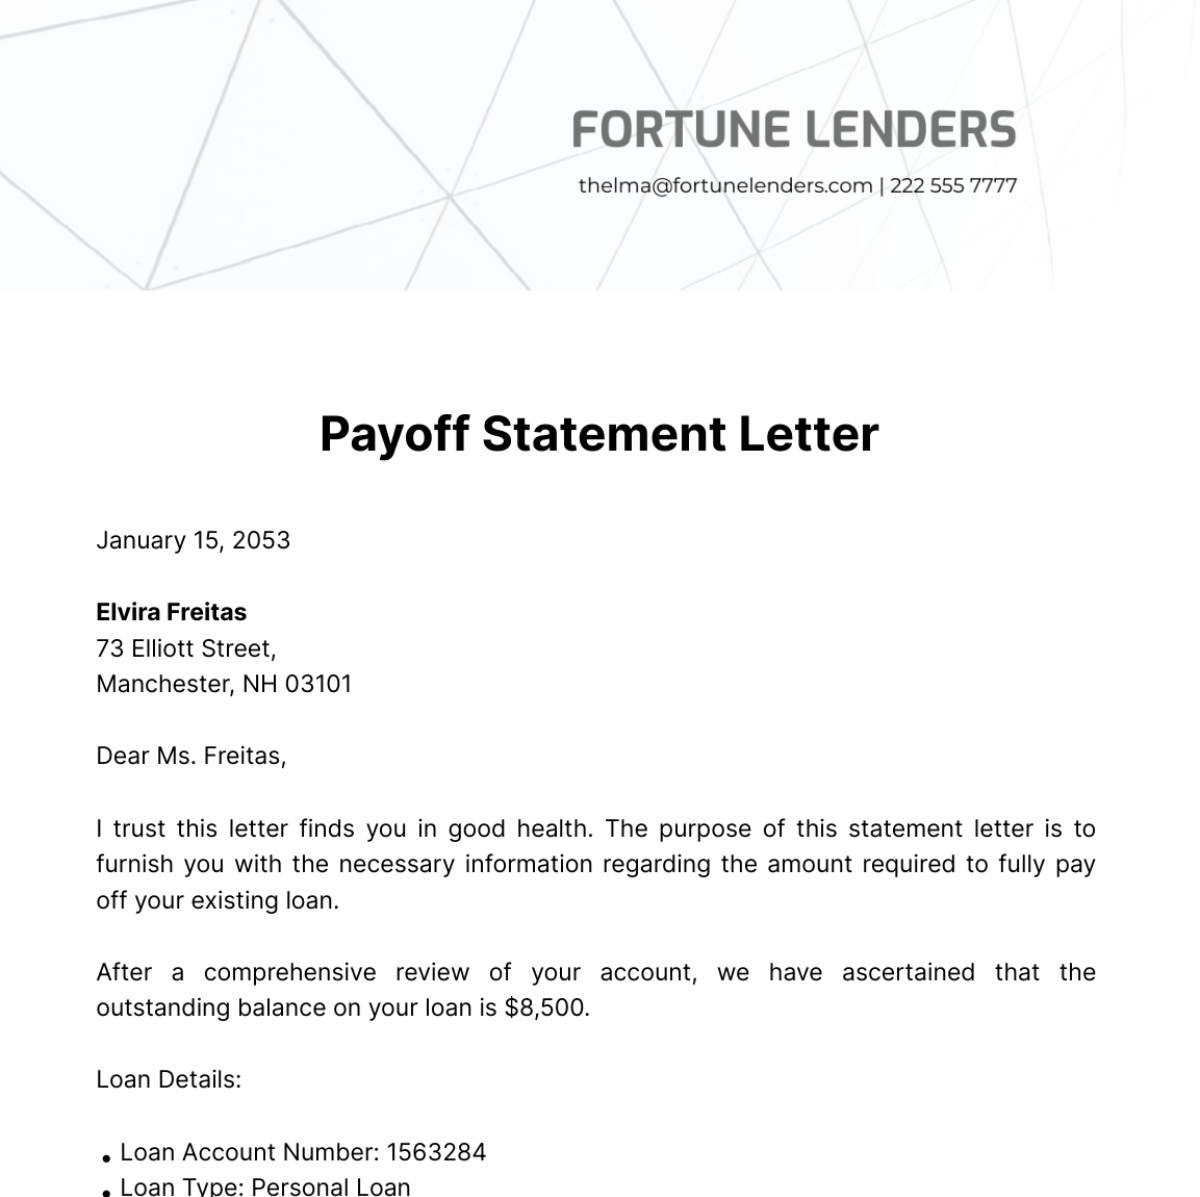 Payoff Statement Letter Template